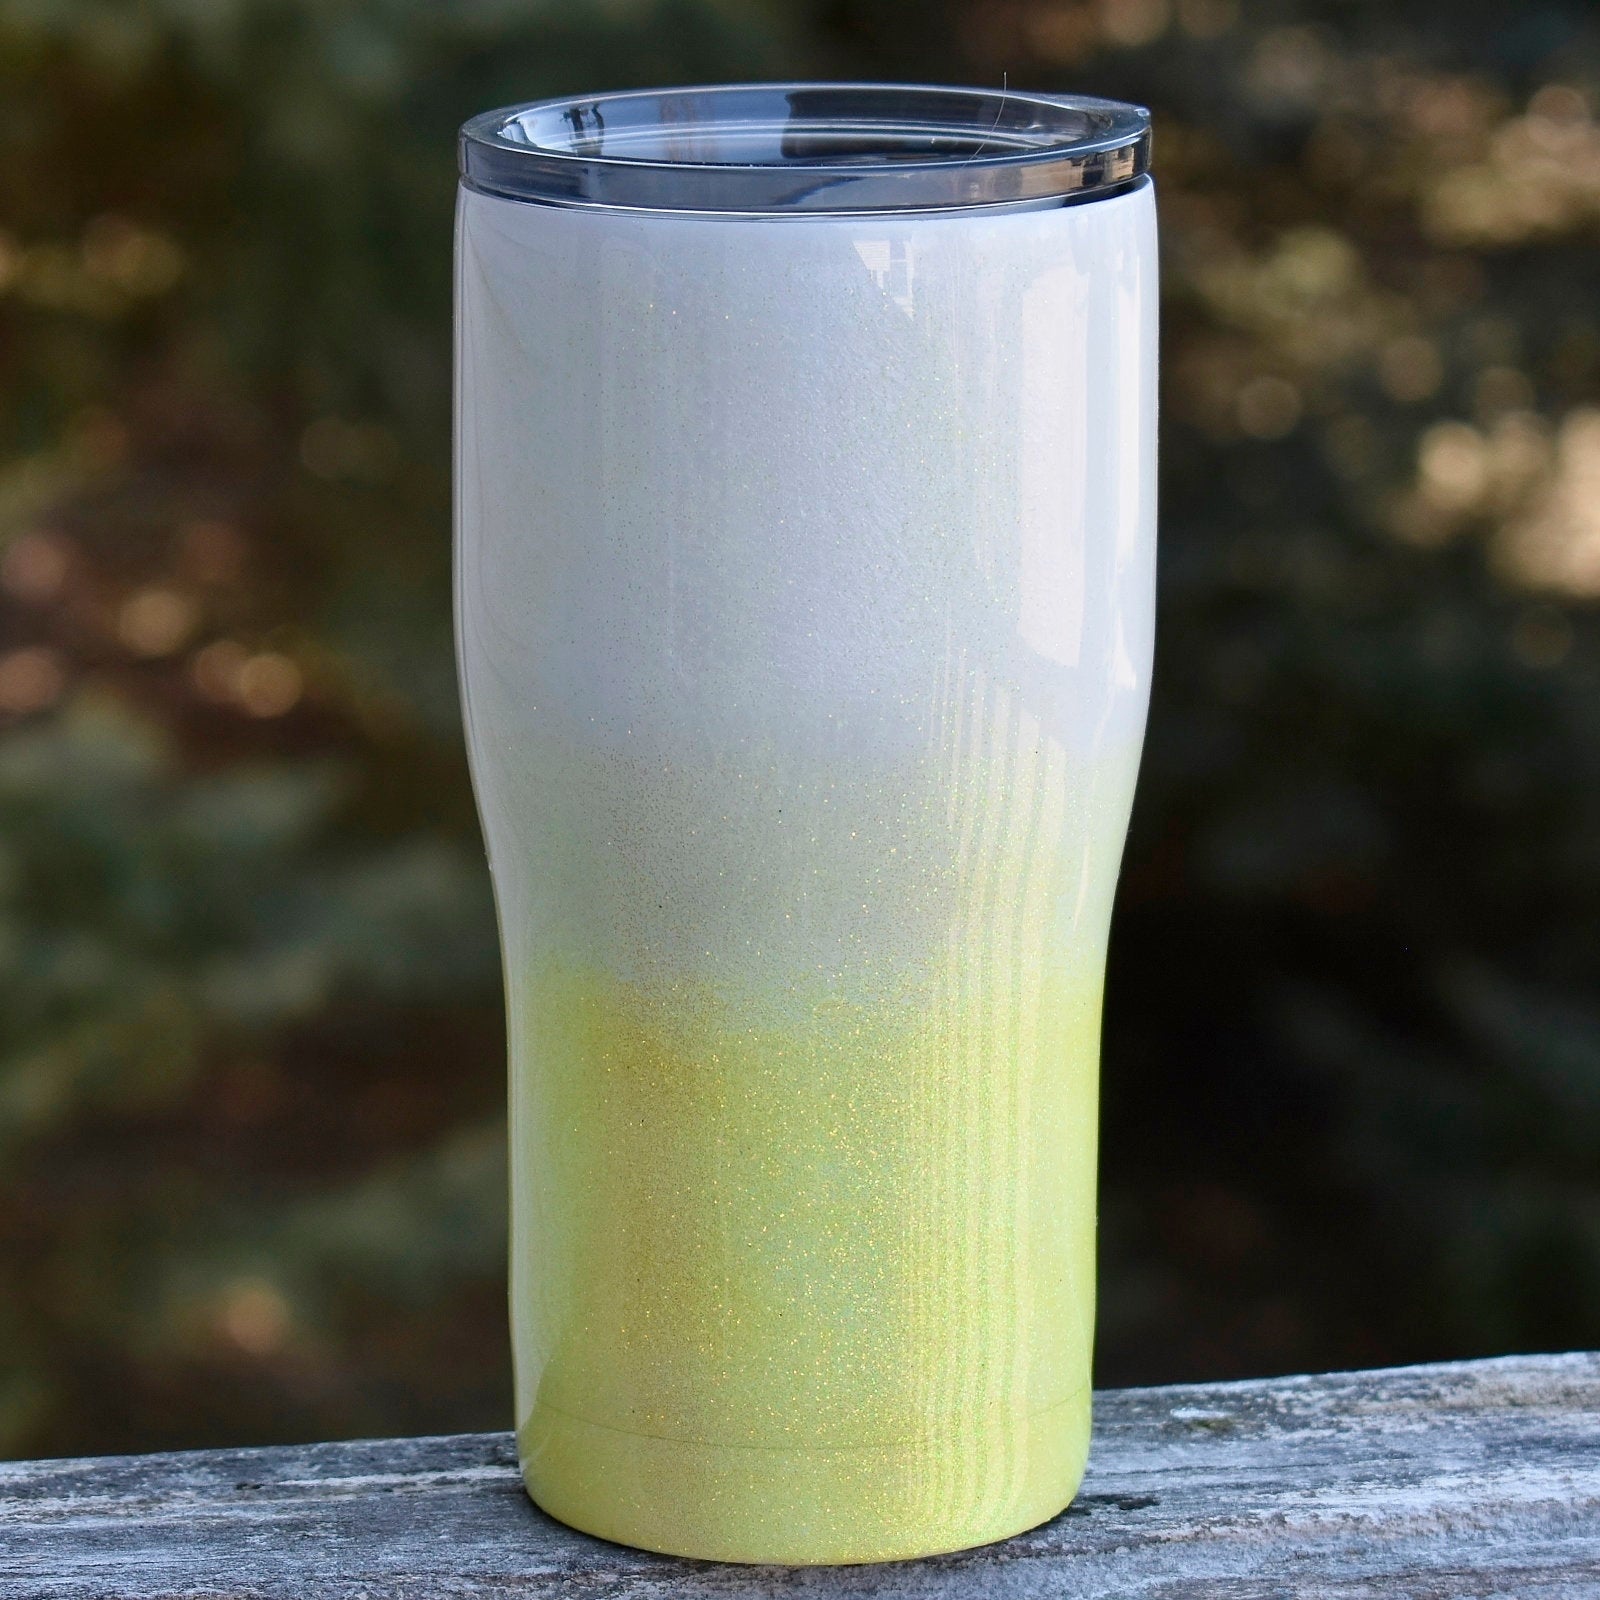 RTS Neon Yellow Glitter Ombre Happy Heifer Sunflower  20 oz Glitter Tumbler | Happy Cow | Cowgirl | Cow Lover | Farm Girl | Cow Tumbler